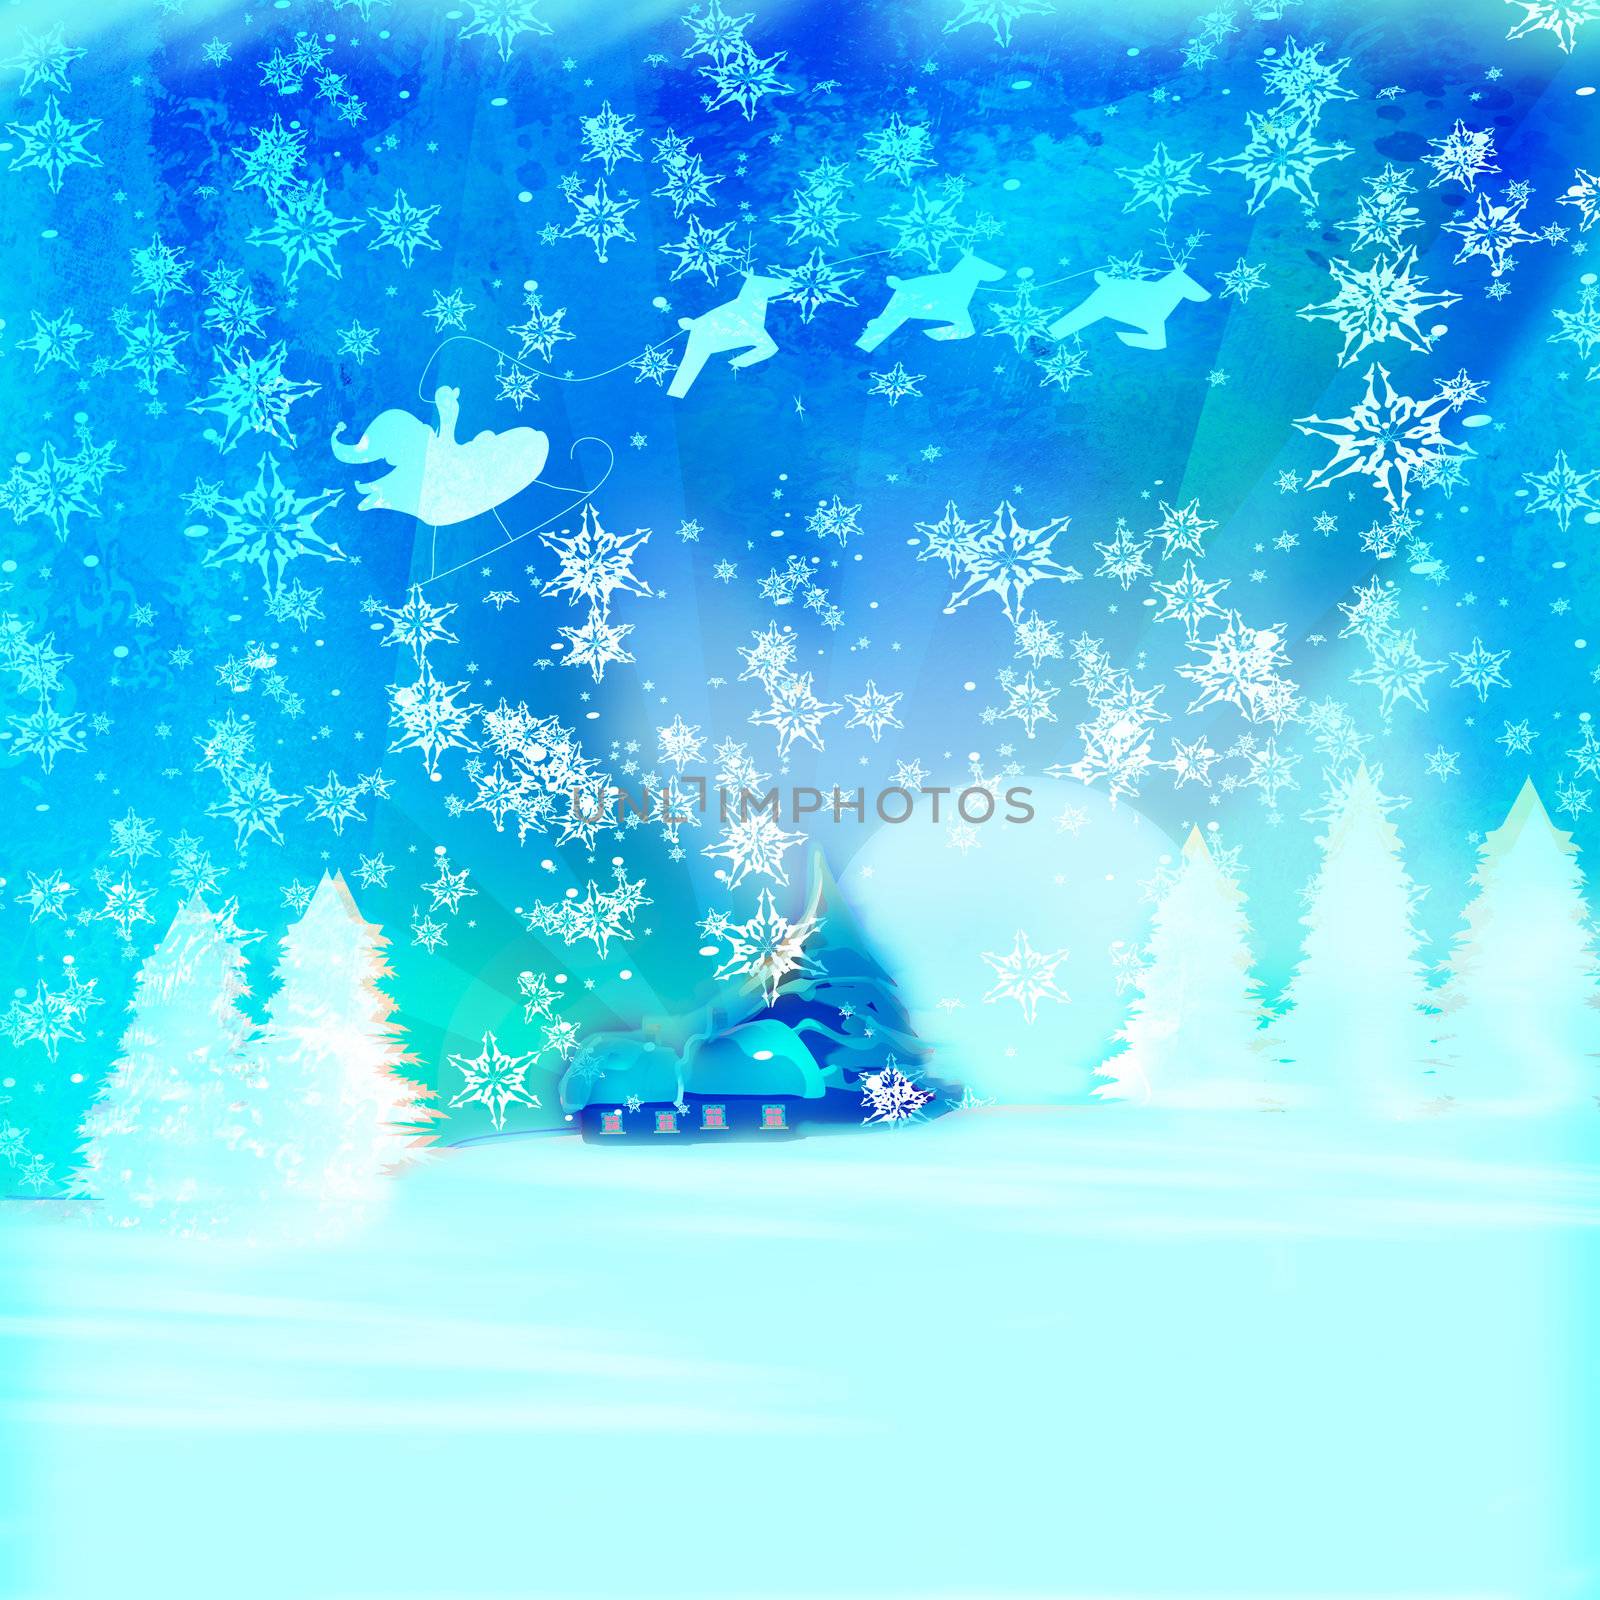 Happy New year card with Santa and winter landscape